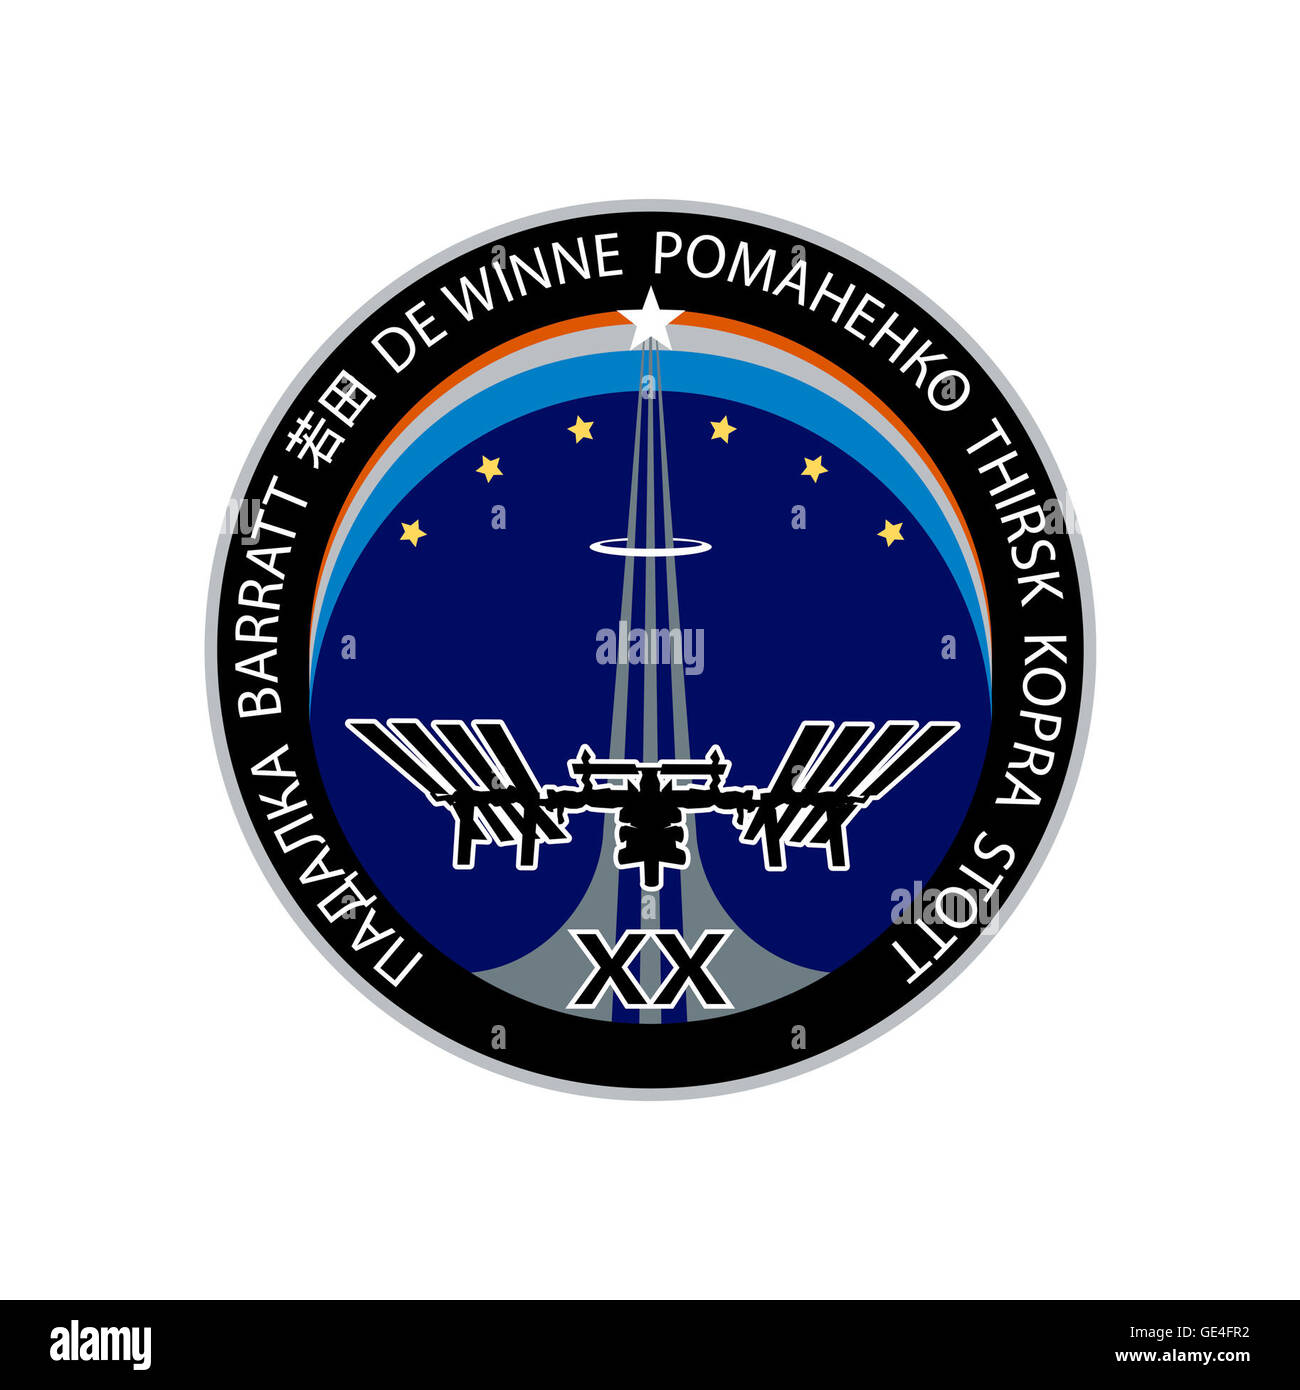 Launch: Soyuz TMA-15 May 27, 2009 Landing: October 11, 2009 Astronauts: Gennady Padalka, Michael Barratt, Timothy Kopra, Koichi Wakata, Roman Romanenko, Frank Winne, Robert Thirsk and Nicole Stott  The Expedition 20 patch symbolizes a new era in space exploration with the first six-person crew living and working onboard ISS and represents the significance of the ISS to the exploration goals of NASA and its international partners. The six gold stars signify the men and women of the crew. The astronaut symbol extends from the base of the patch to the star at the top to represent the internationa Stock Photo